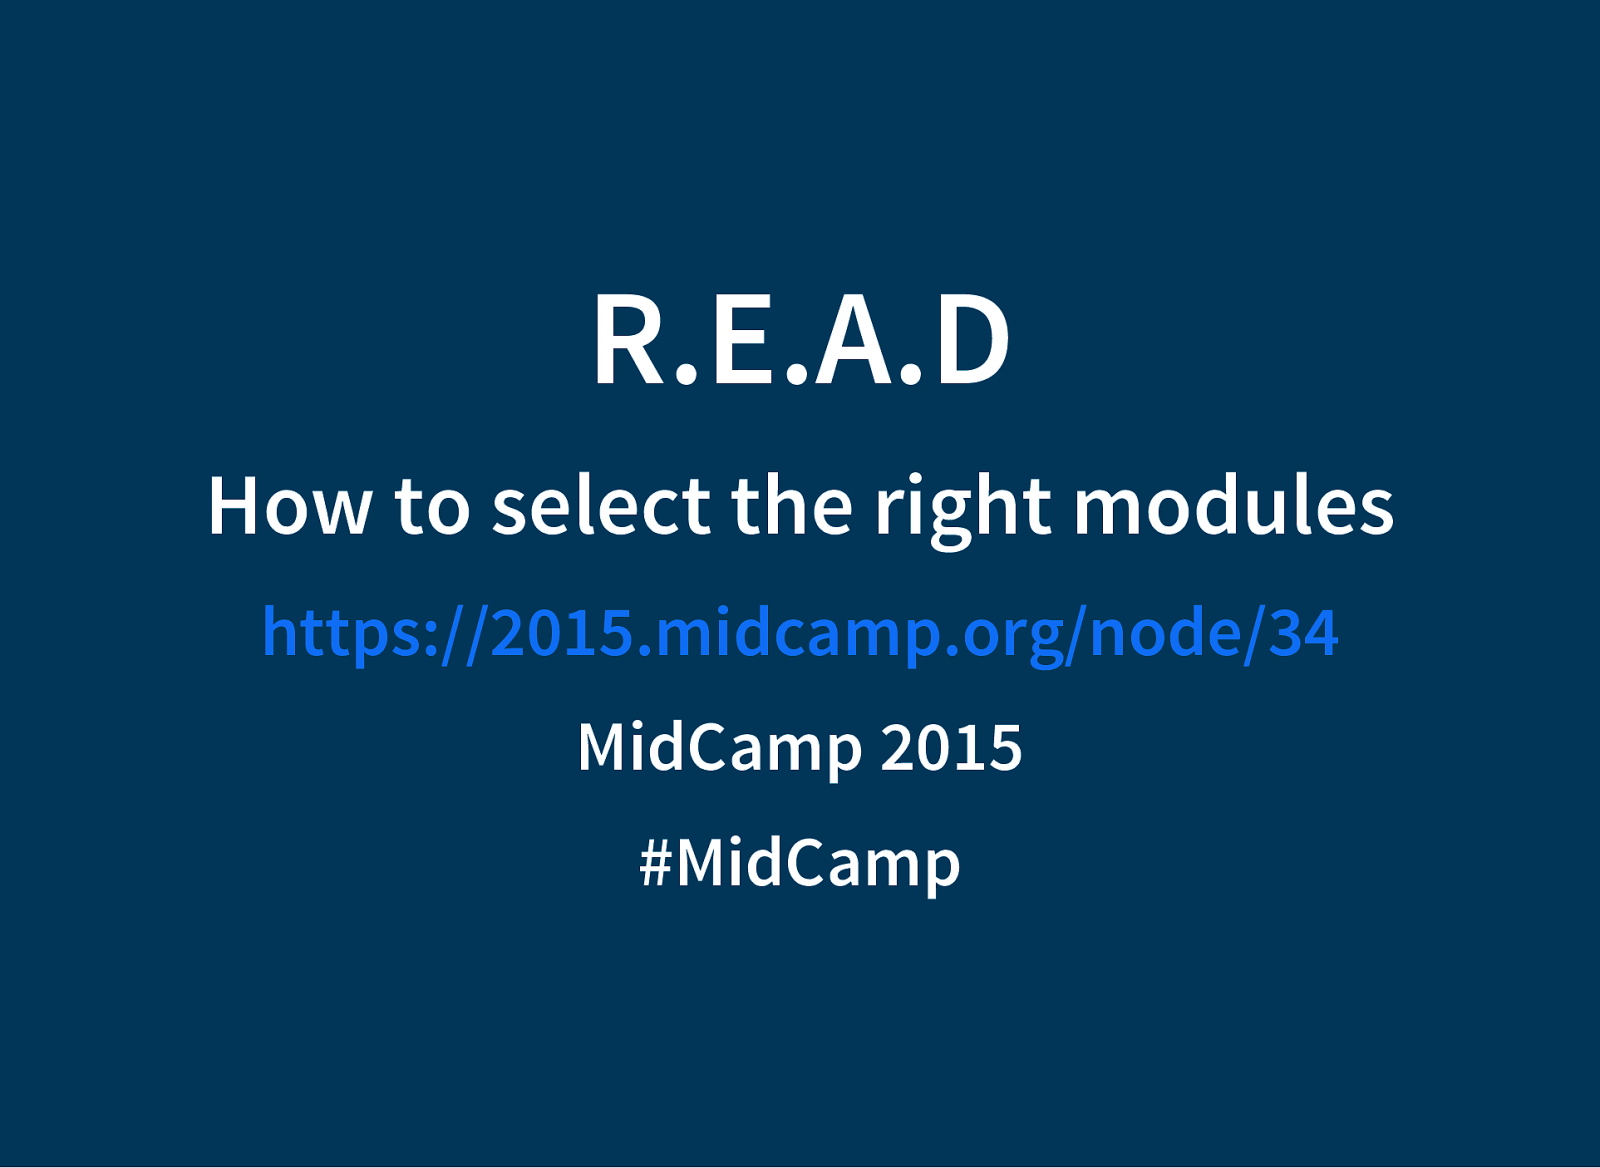 R.E.A.D: Four steps for selecting the right modules